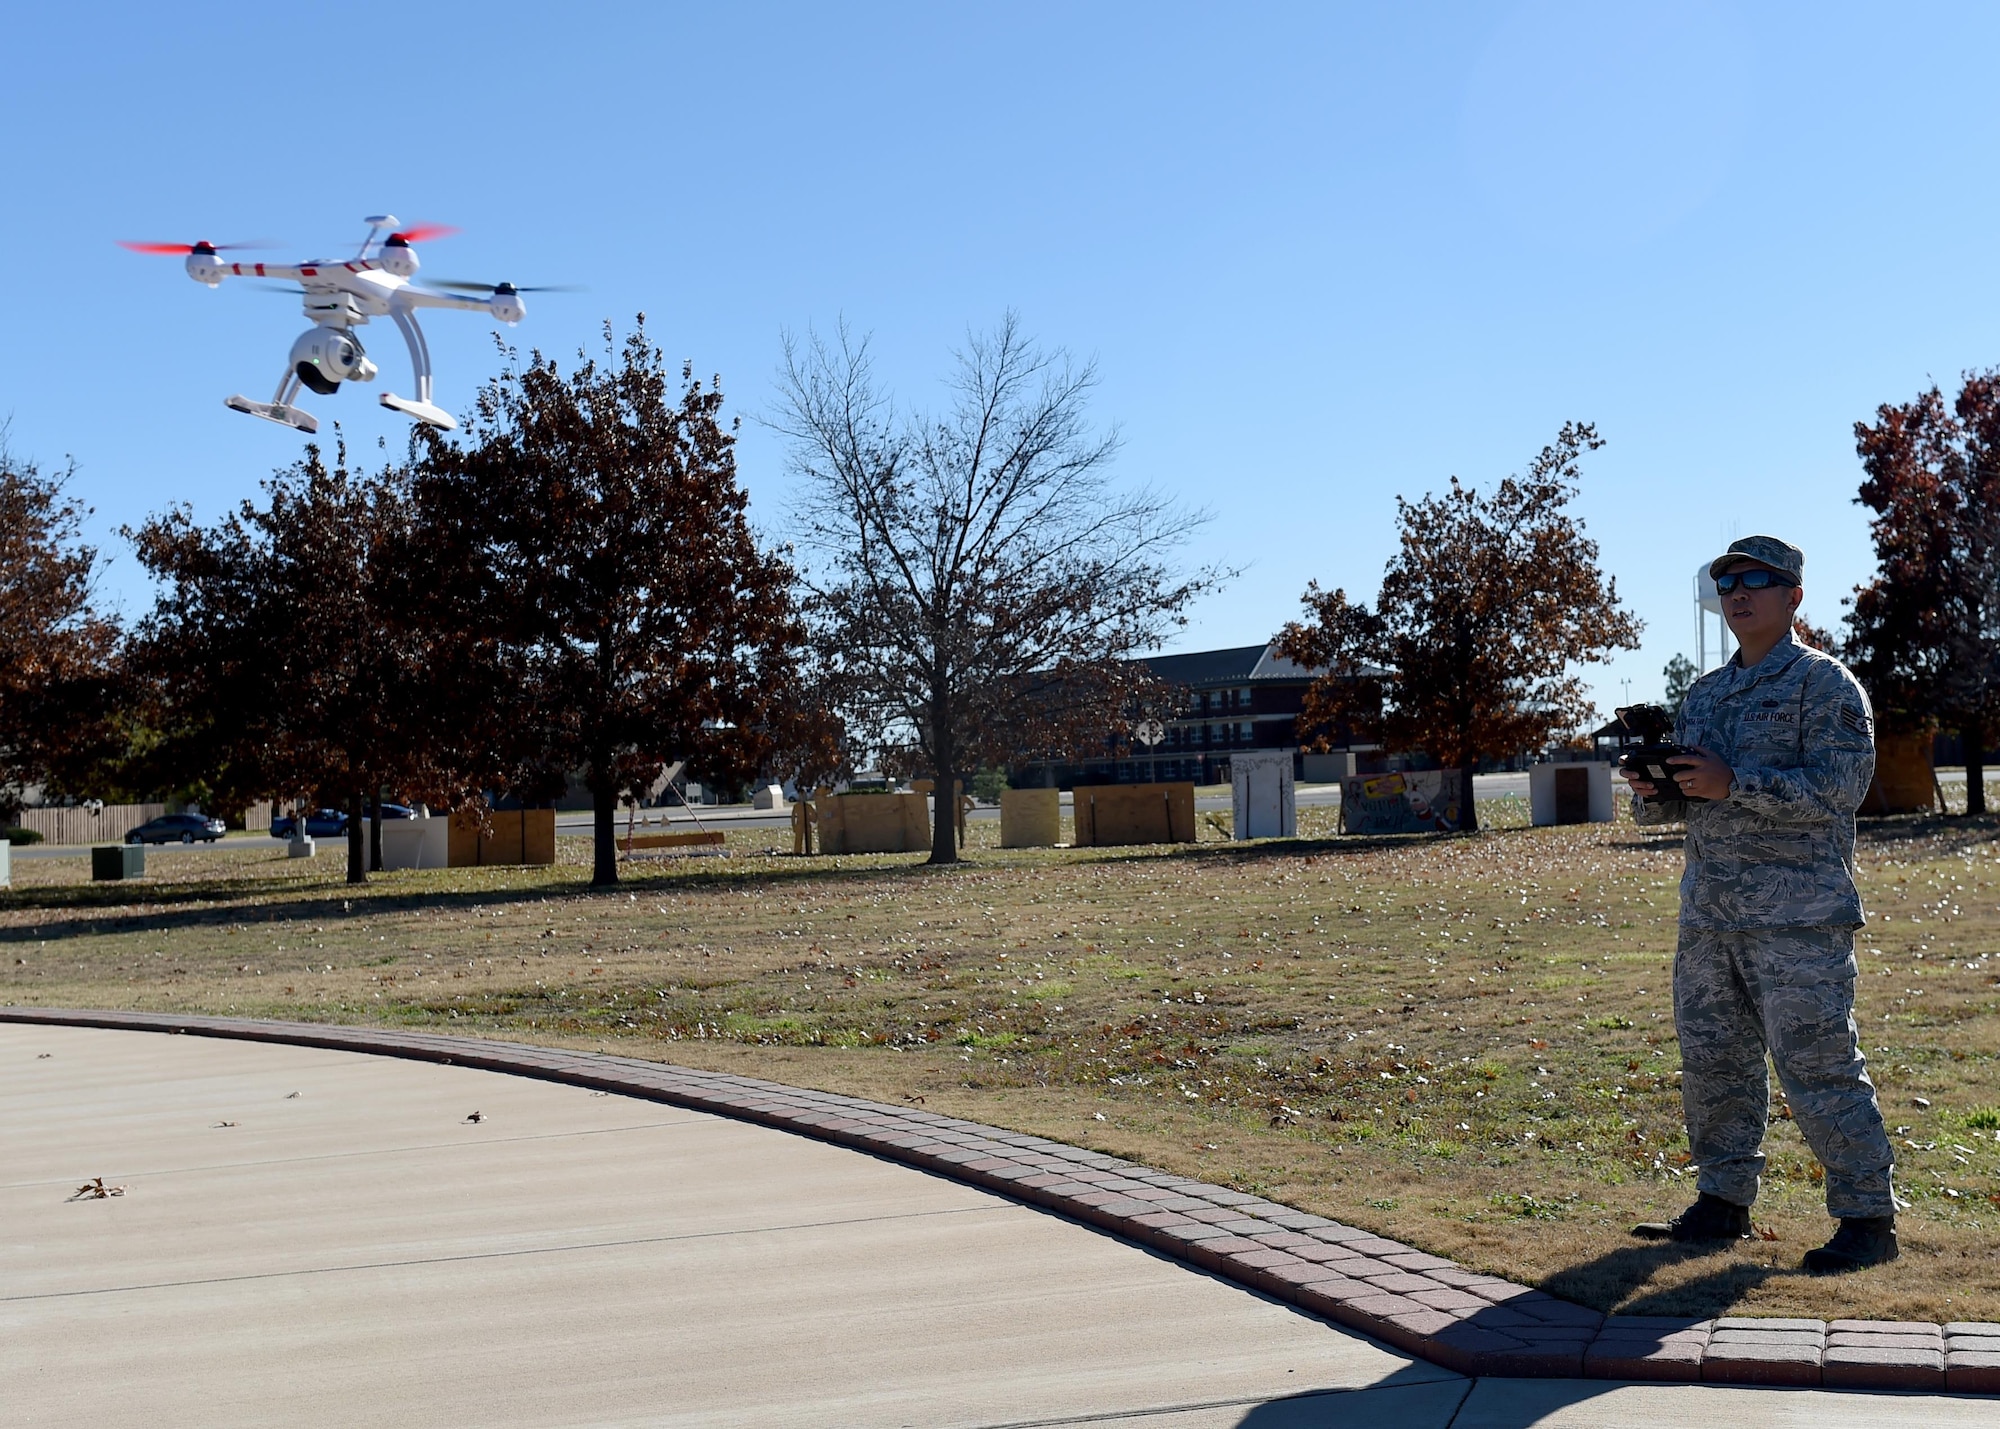 U.S. Air Force Staff Sgt. Anont Koonkongsatian, 97th Air Mobility Wing Safety Office safety technician and drone enthusiast, flies his drone to demonstrate how he uses it for official purposes at Wings of Freedom Park, Dec. 15, 2015. With the increase of drones’ popularity in the last few years, laws restricting the use of drones within 5 miles of an airbase have been made but some exceptions are made for official tasks such as checking roofs and showing cleared roadways on base. (U.S. Air Force photo by Airman 1st Class Kirby Turbak/Released)